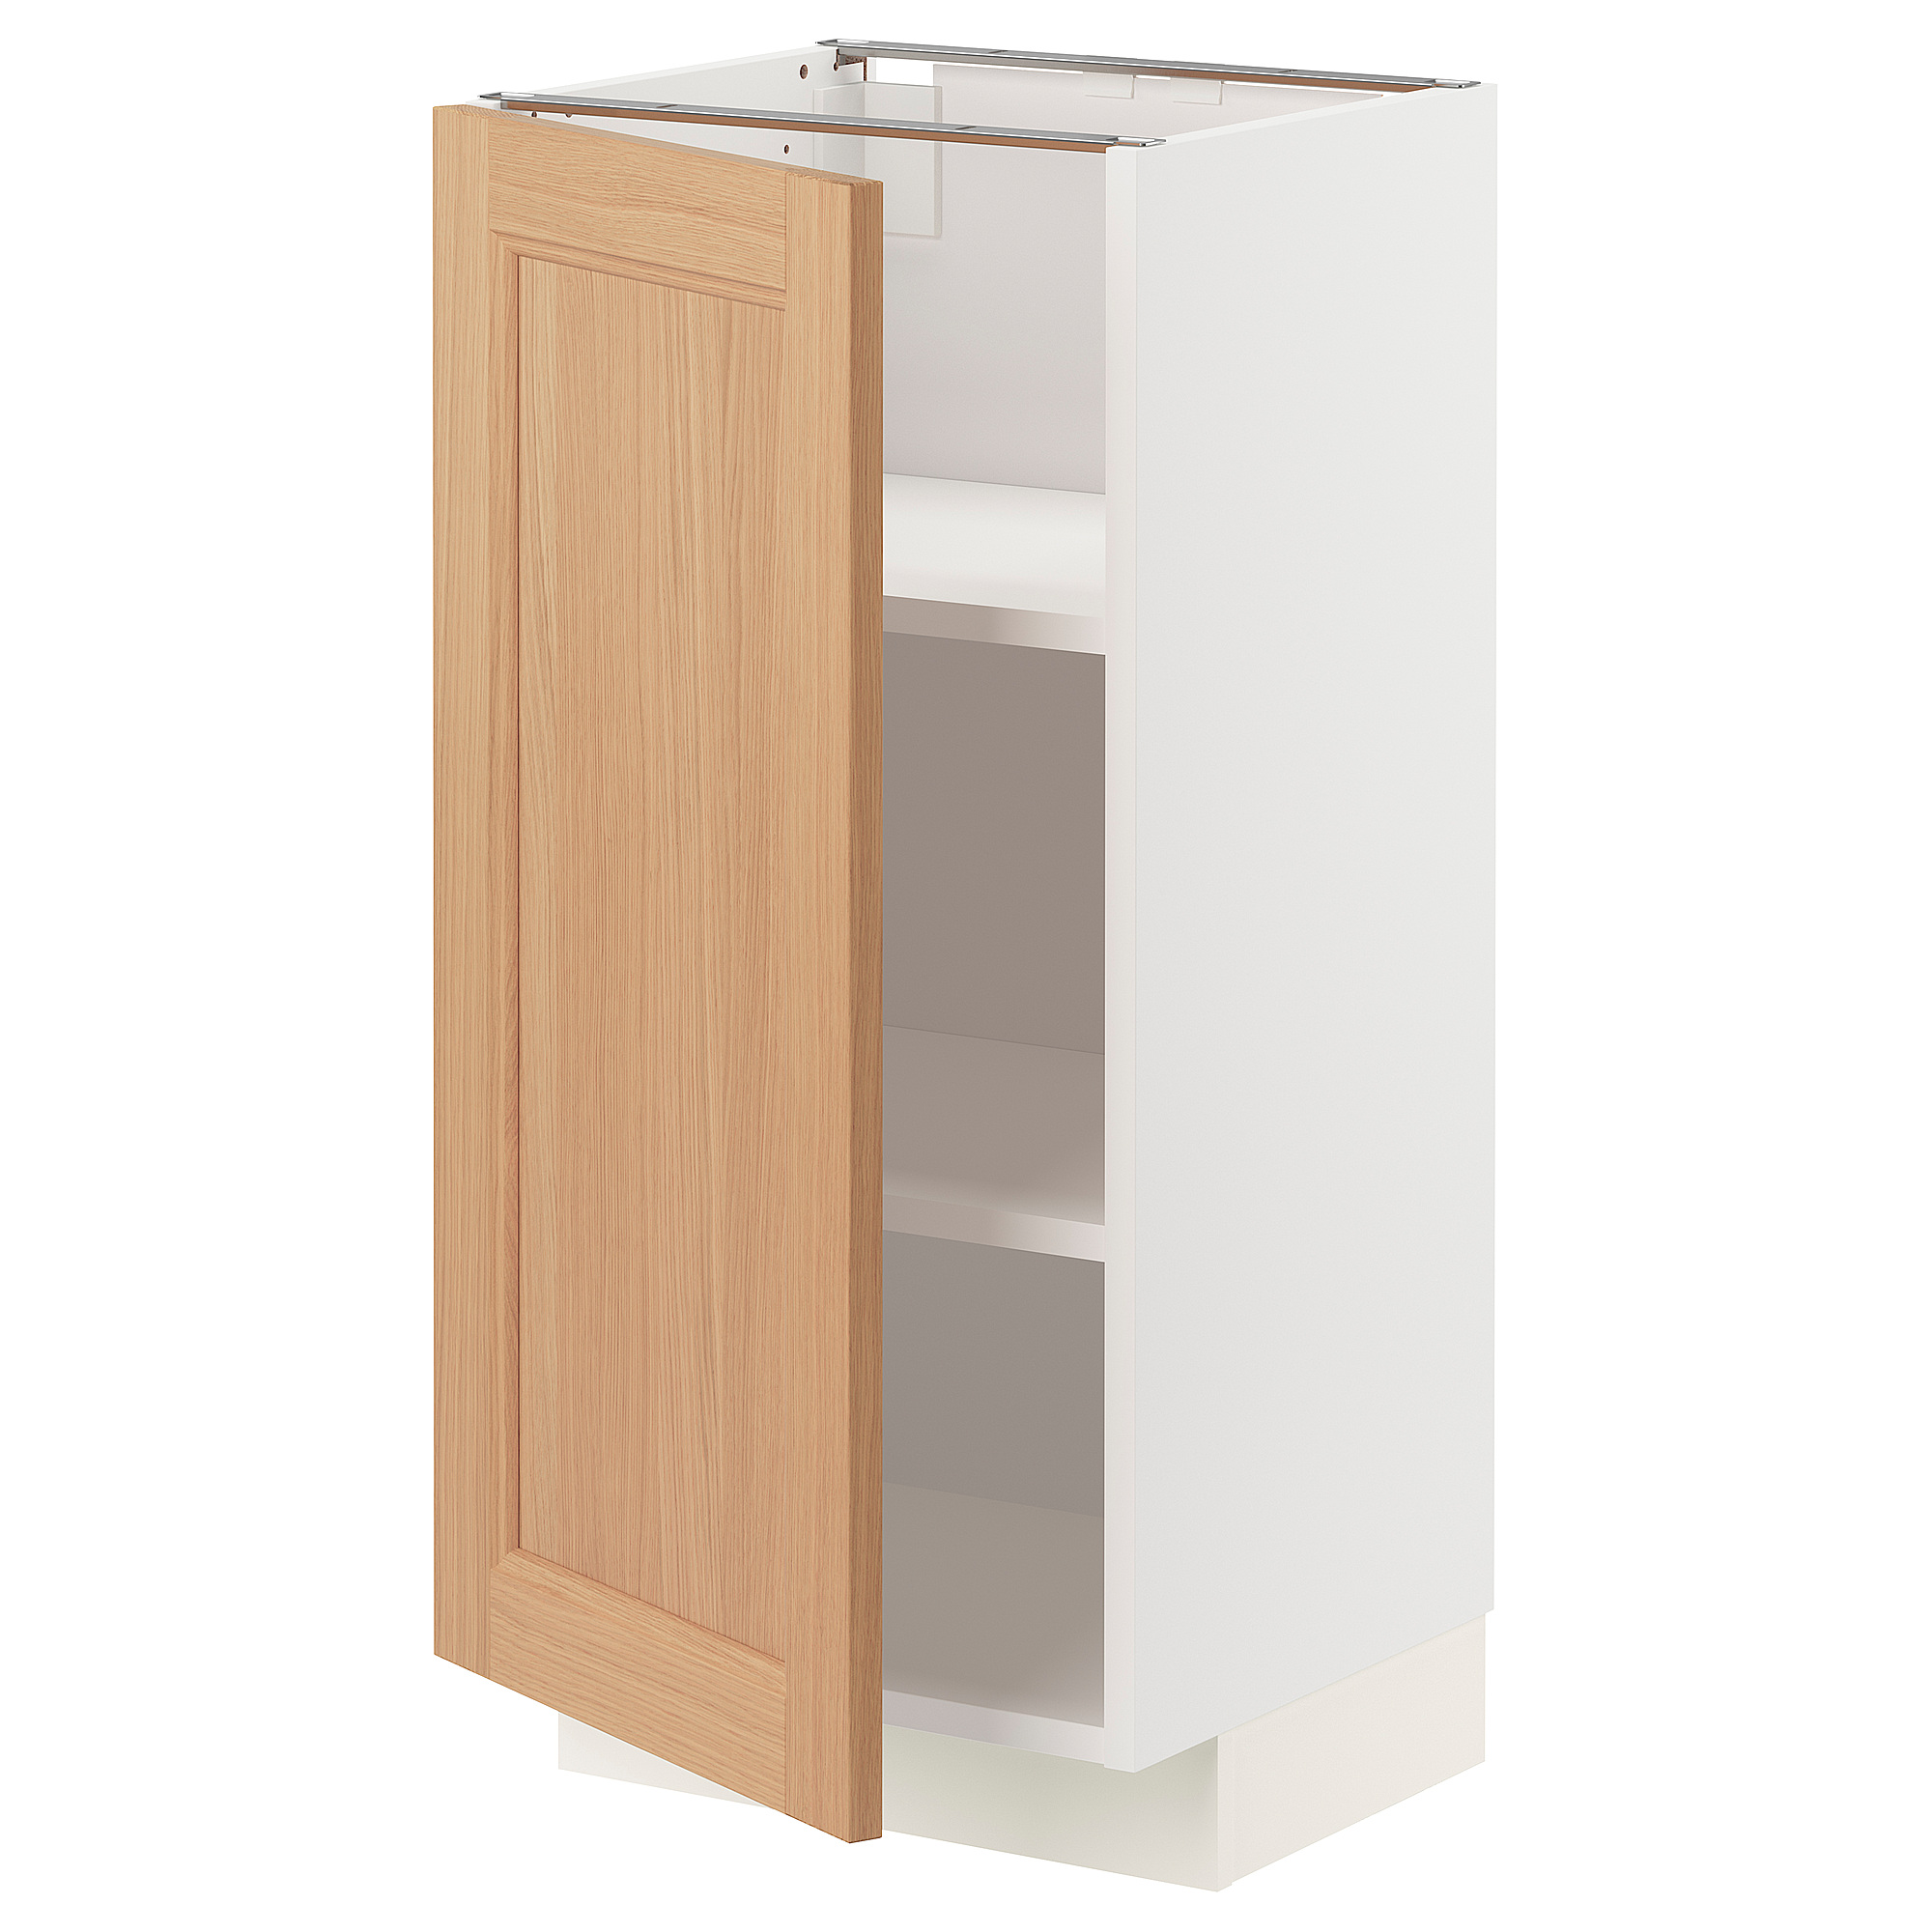 METOD base cabinet with shelves 